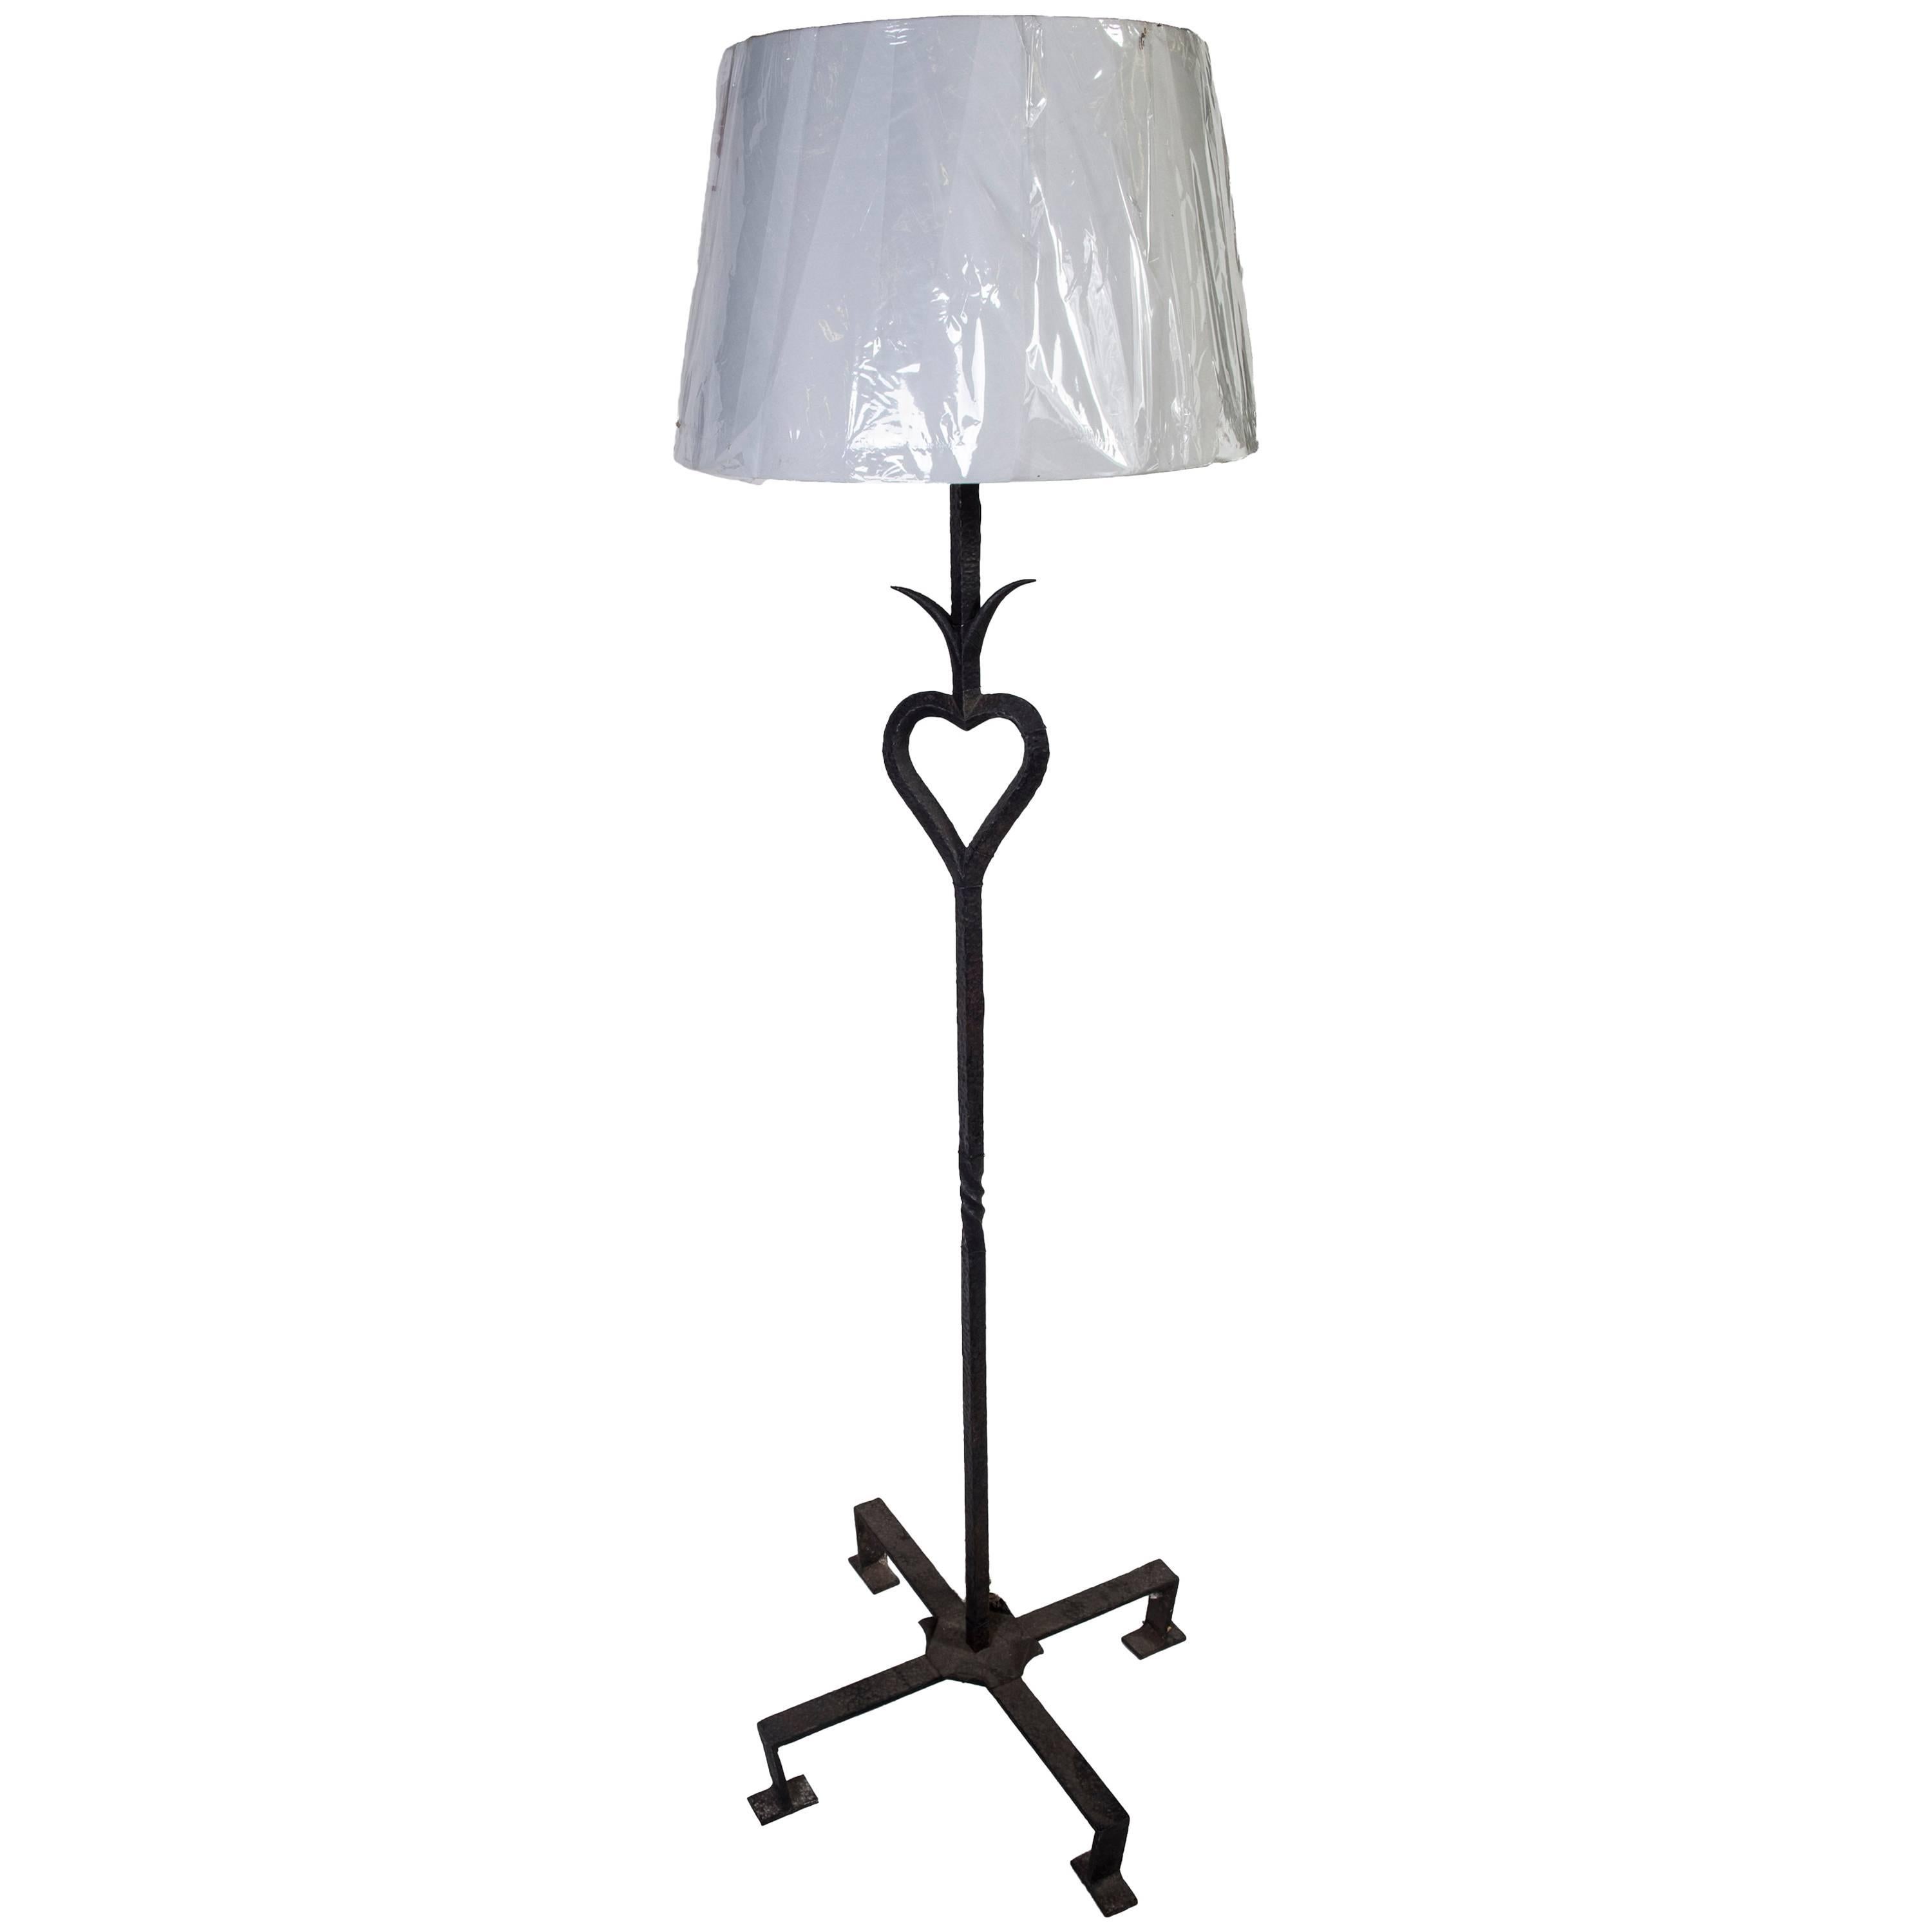 French Artisanal Wrought Iron Floor Lamp For Sale